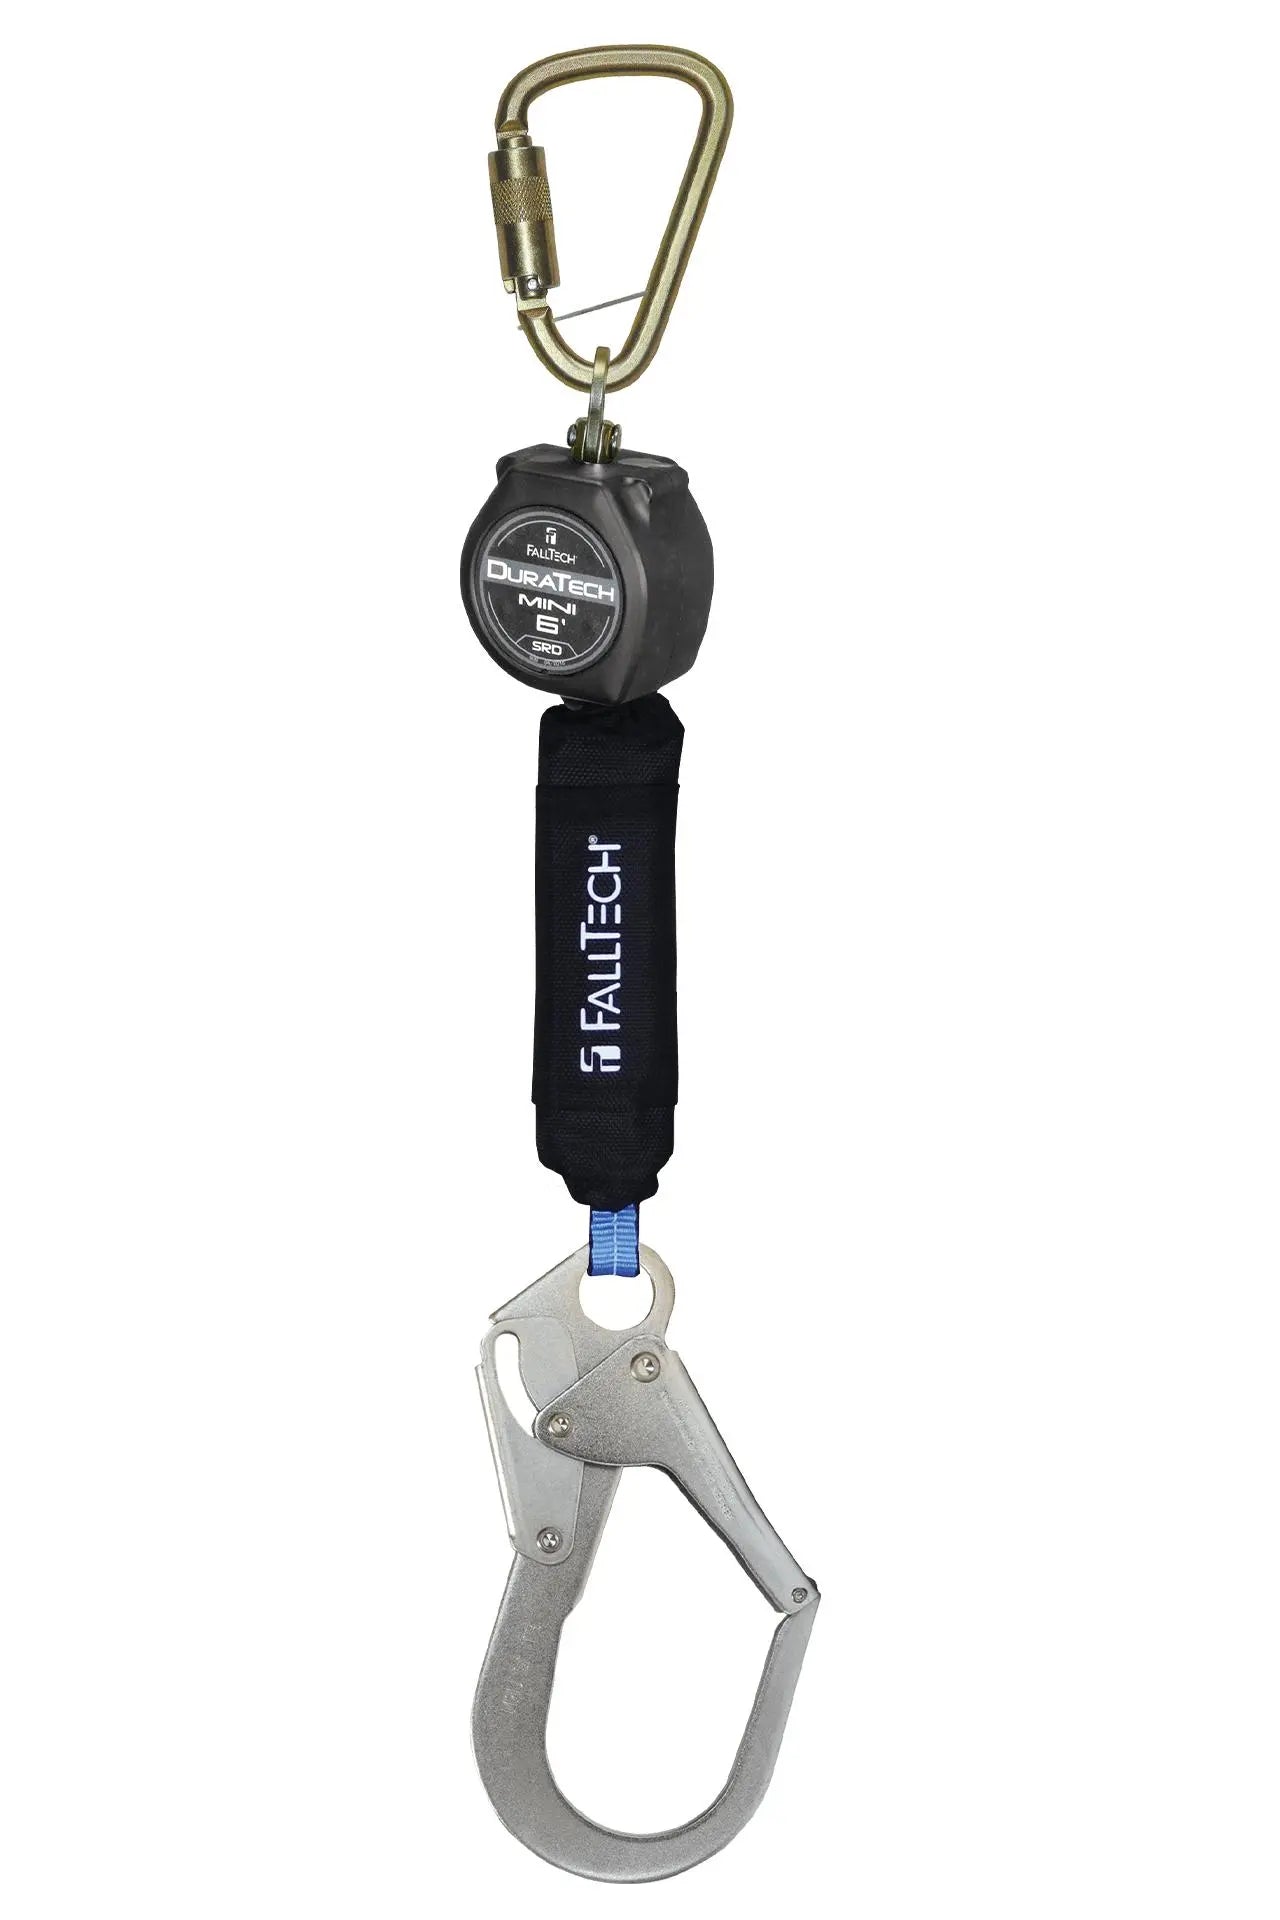 FallTech 6' Mini Personal SRL with Steel Rebar Hook, Includes Steel Dorsal Connecting Carabiner